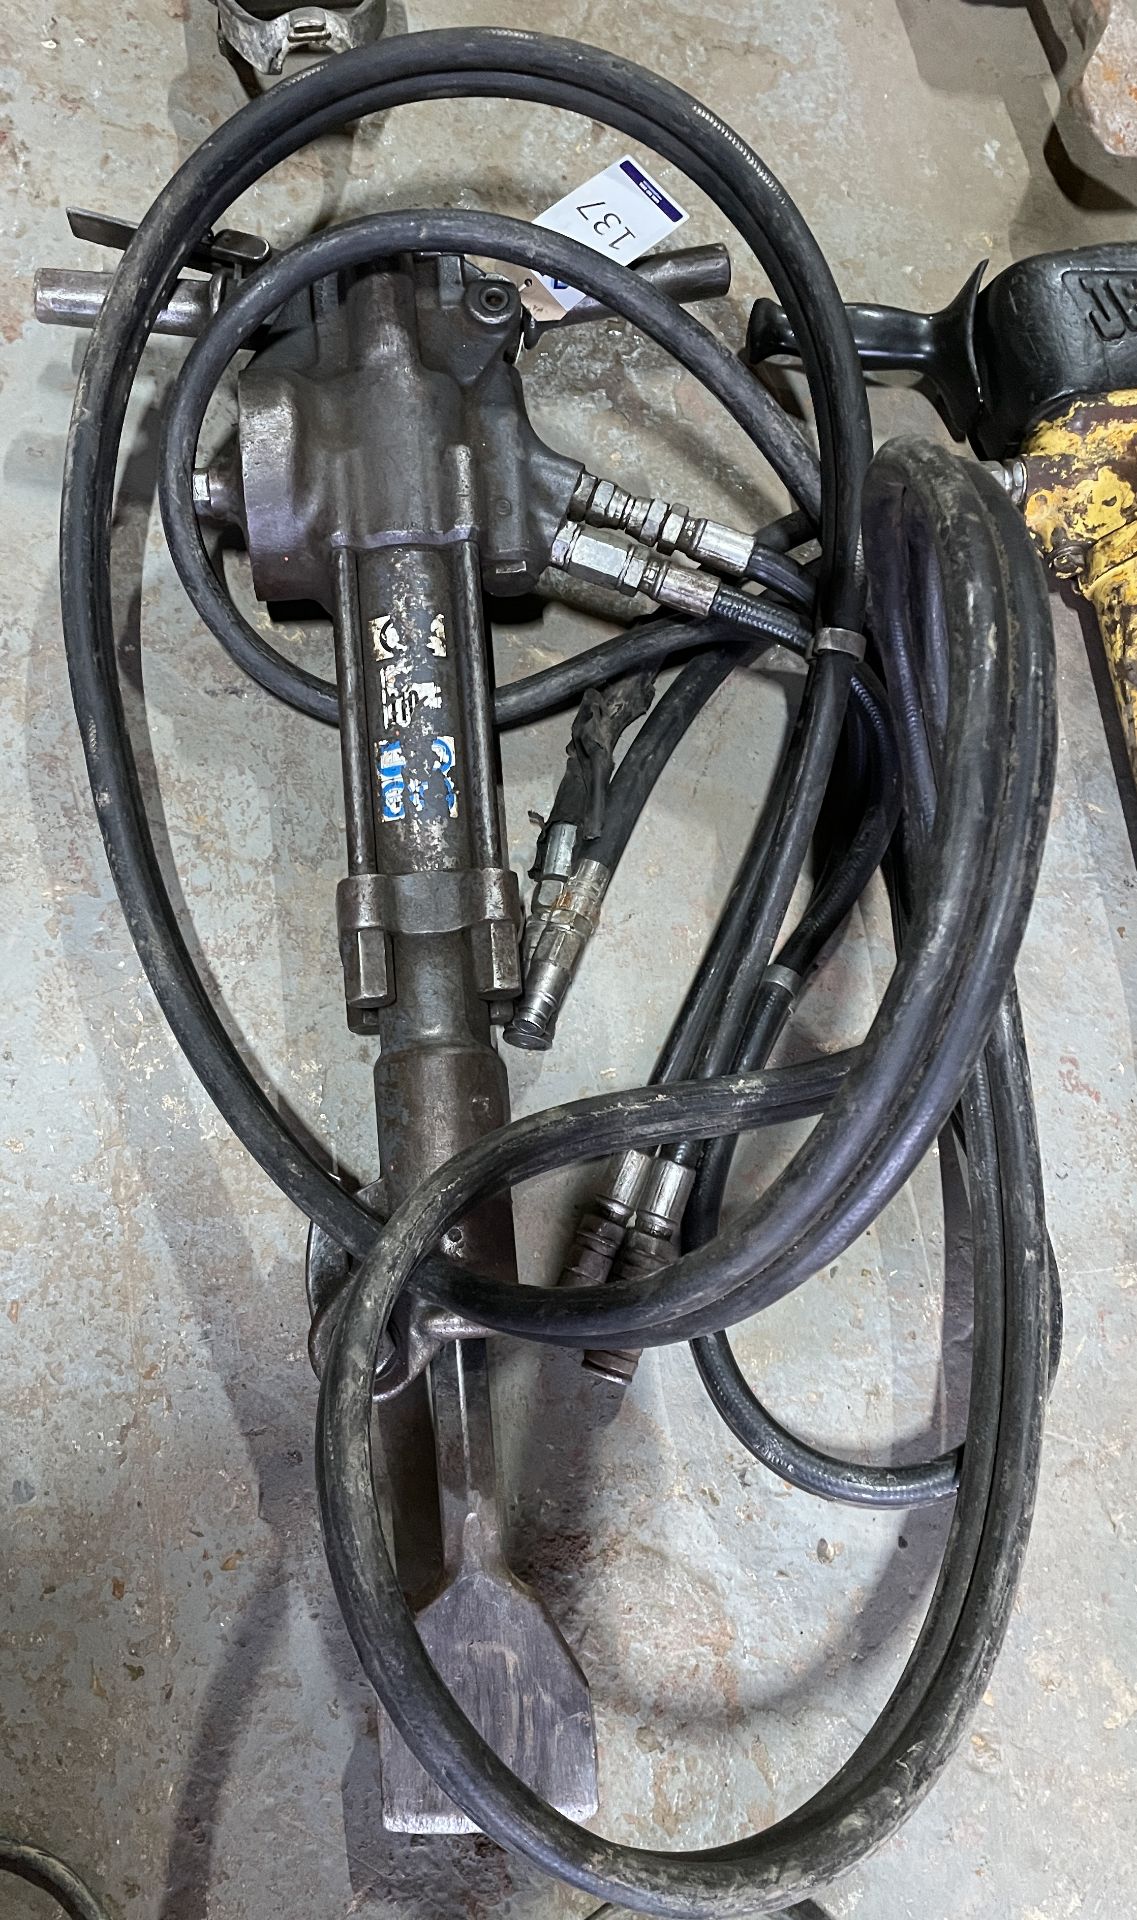 Terex Hydraulic Breaker with Hose (Location: March, Cambridge. Please Refer to General Notes)